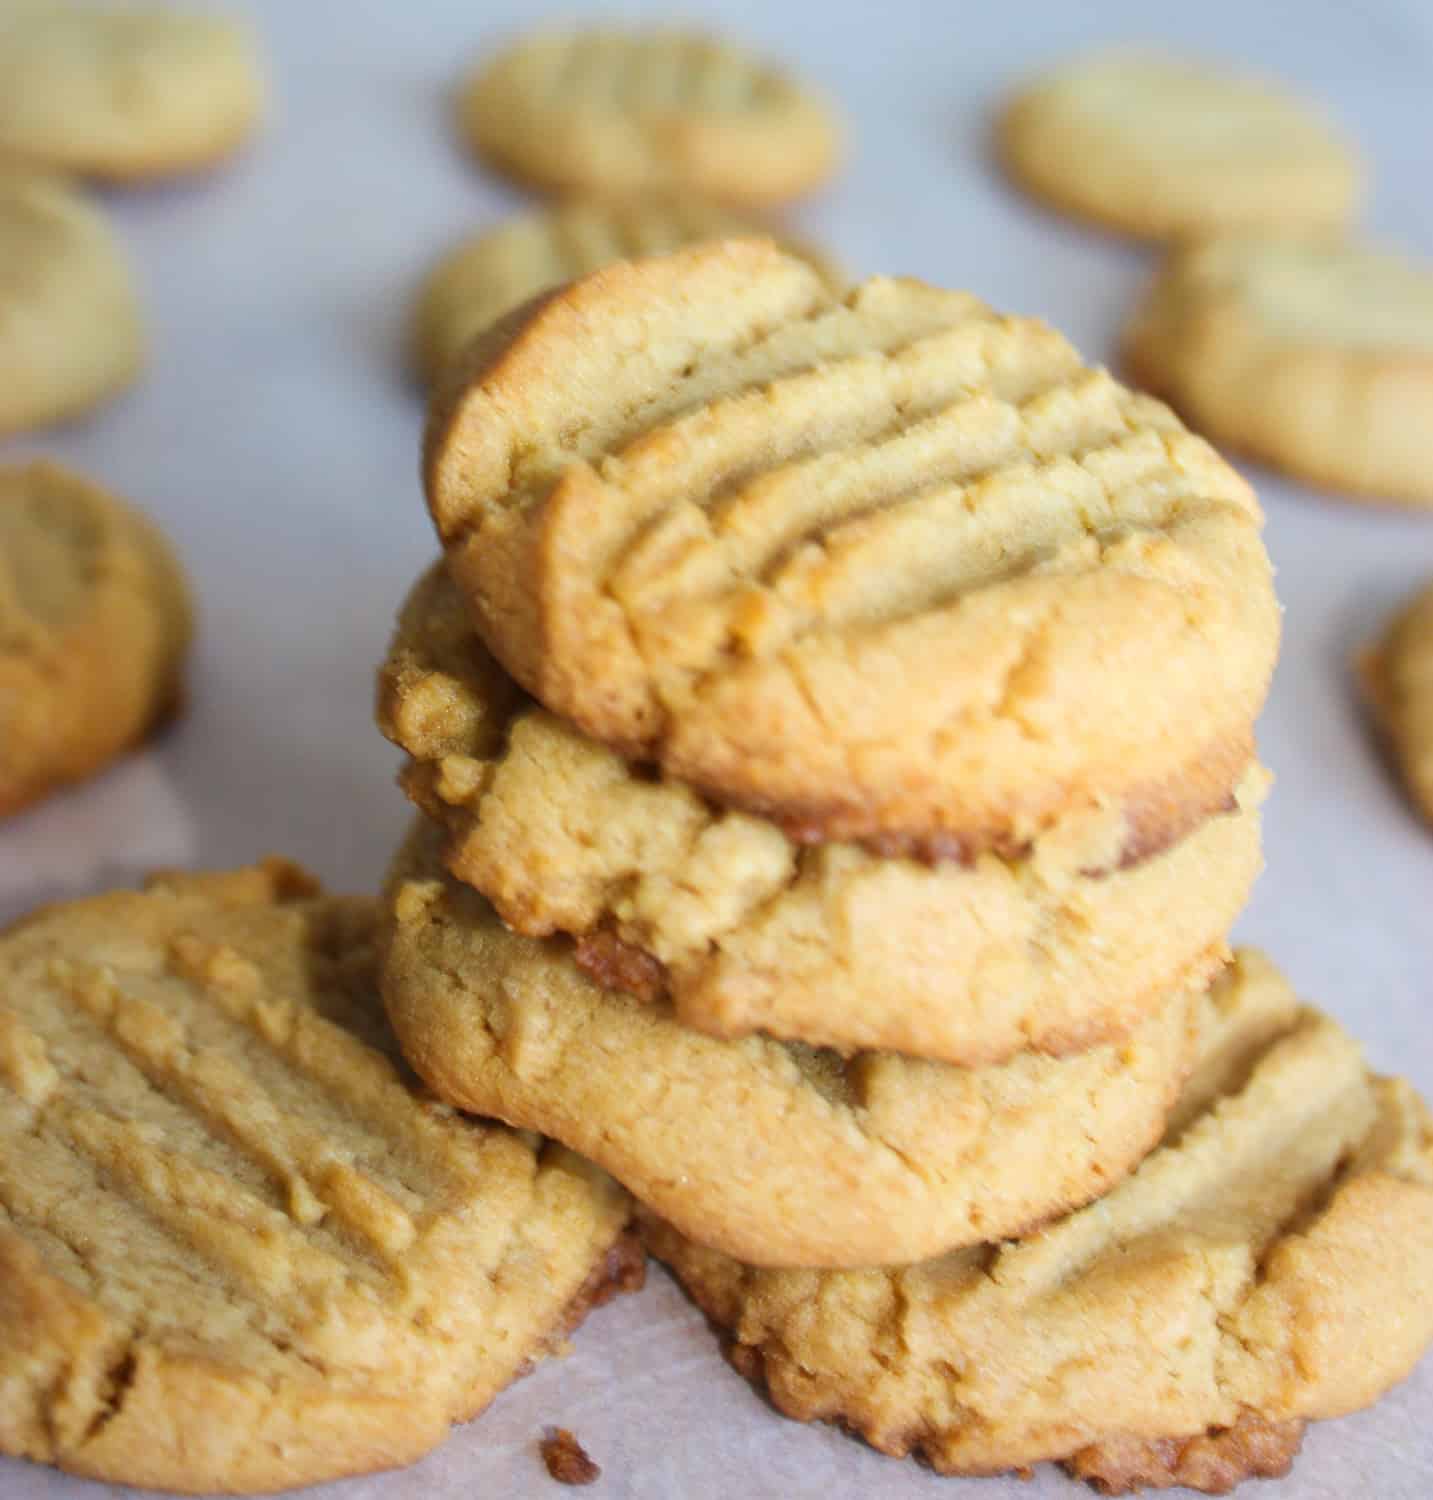 Peanut Butter Cookies are a classic that I really missed when I had to start eating gluten free. <span class="" style="display:block;clear:both;height: 0px;padding-top: 25px;border-top-width:0px;border-bottom-width:0px;"></span>  This gluten free version really hits the spot and satisfies that peanut butter cookie craving!